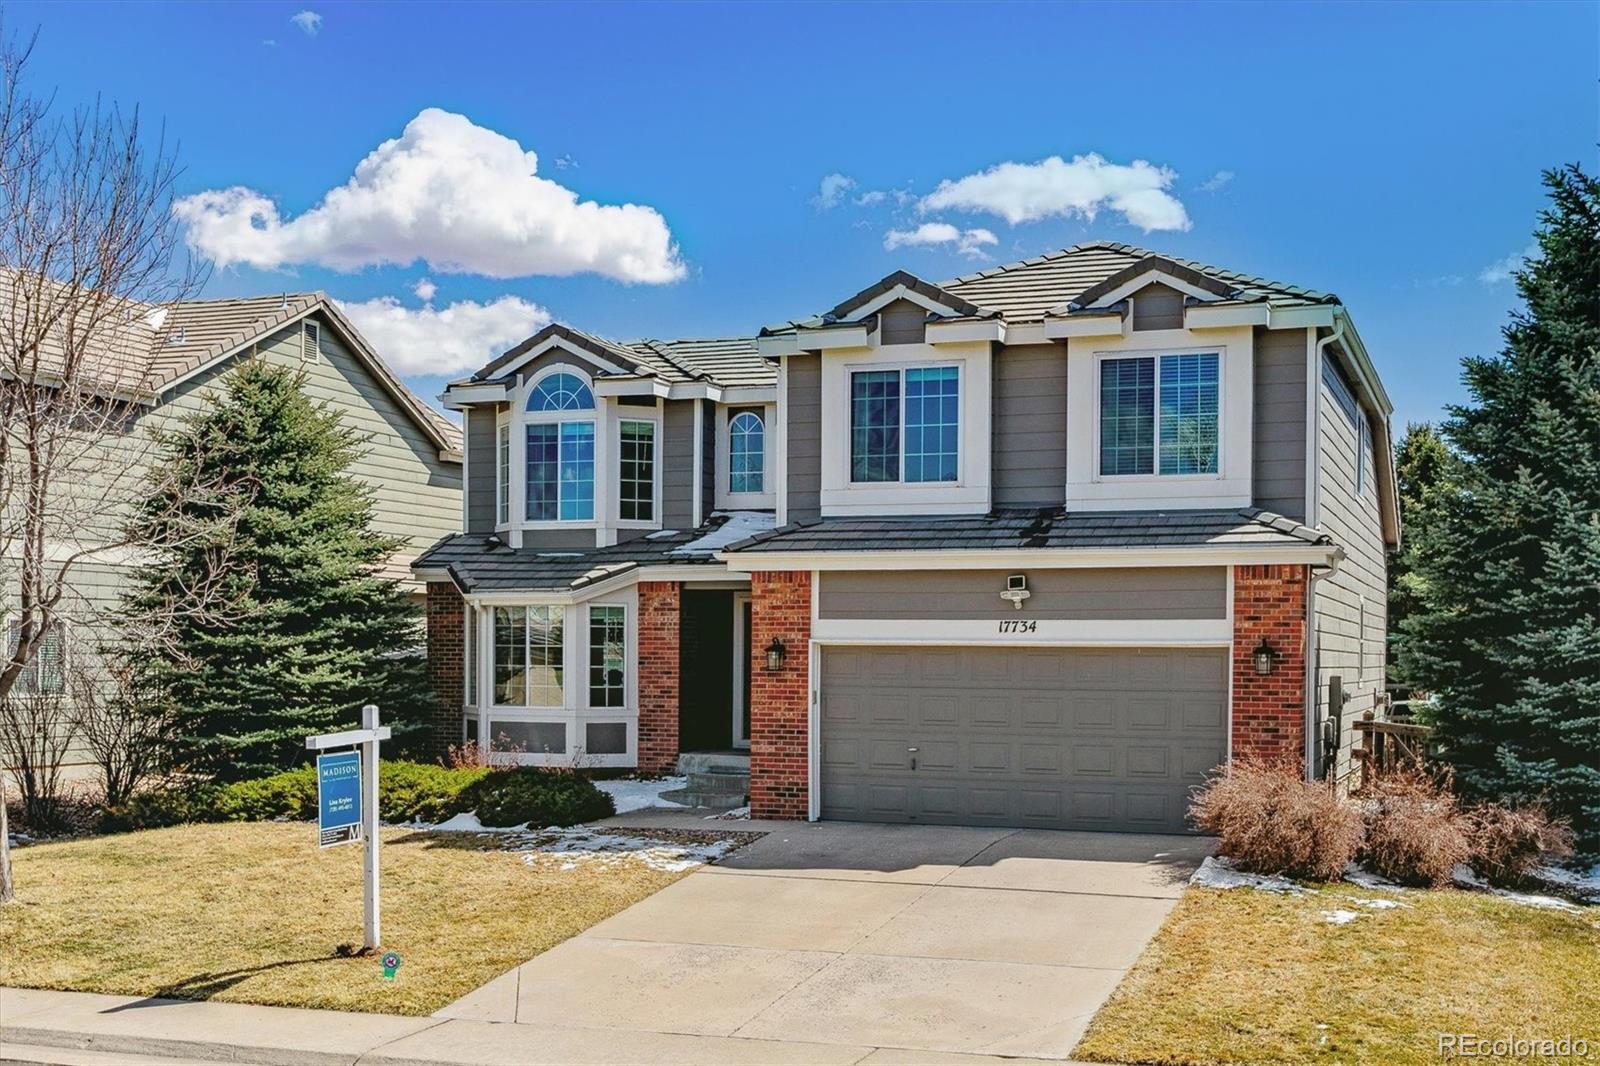 17734 e oakwood place, aurora sold home. Closed on 2024-04-25 for $766,500.